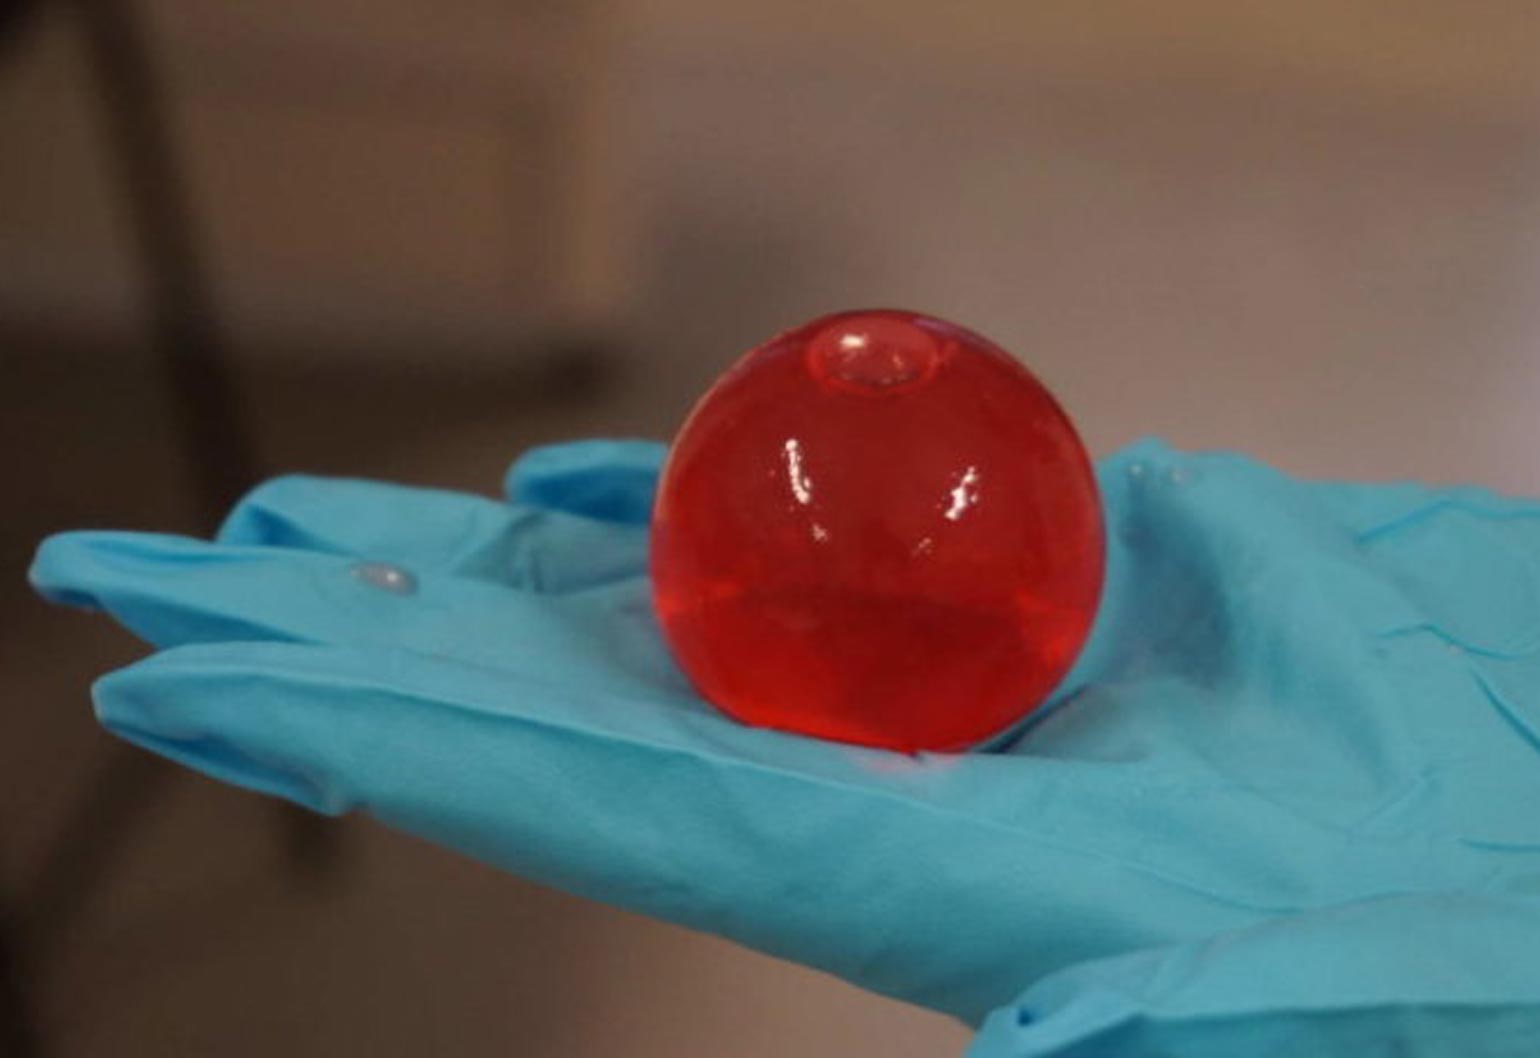 edible water bottle made from seaweed